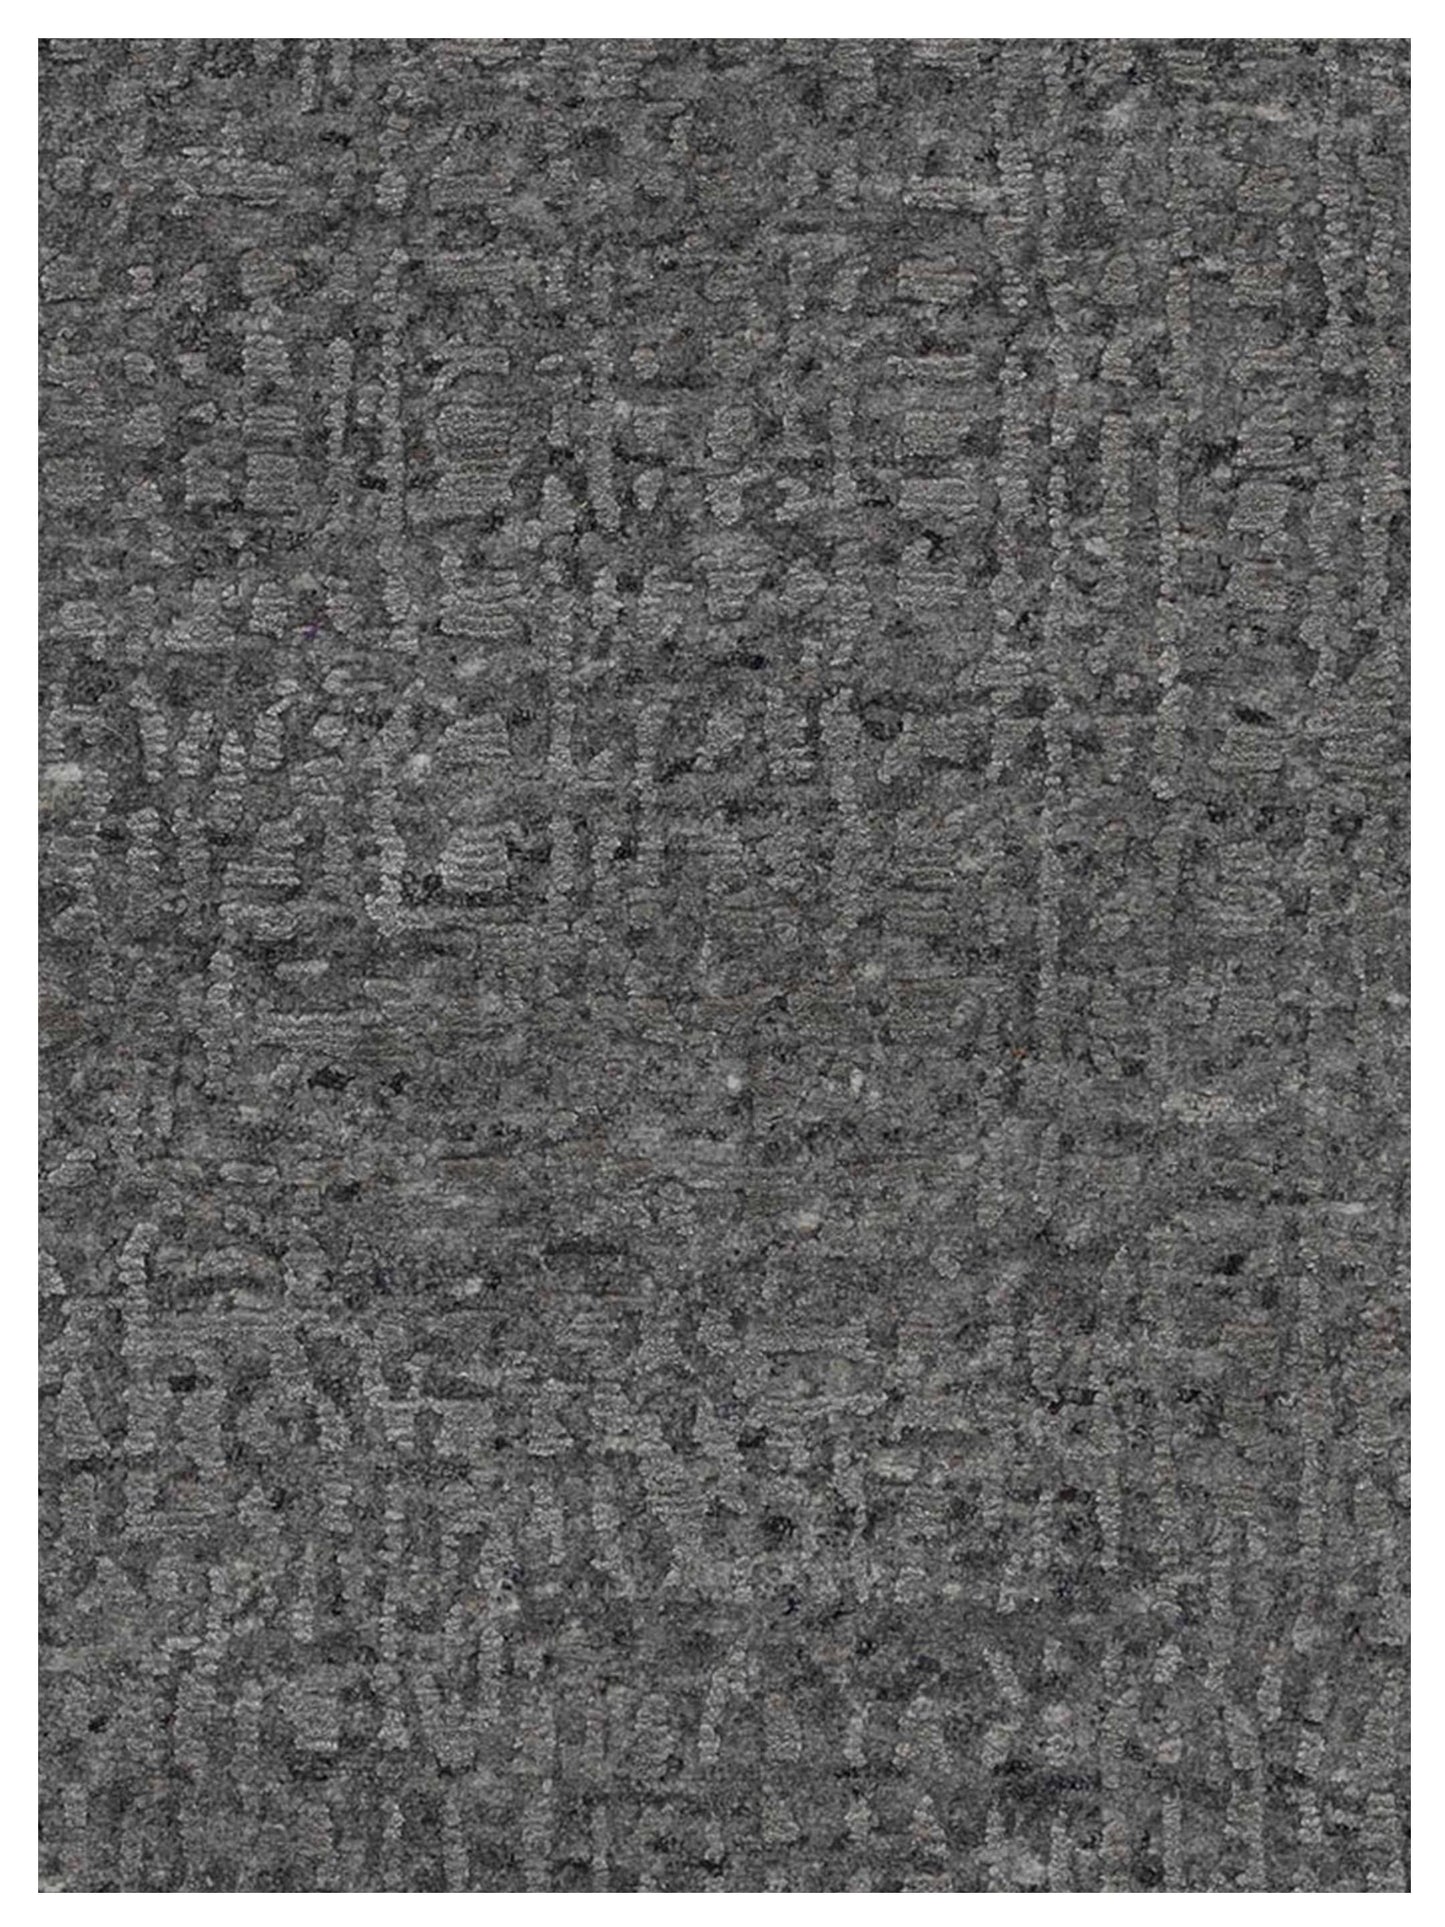 Artisan Mary  Stone  Contemporary Knotted Rug